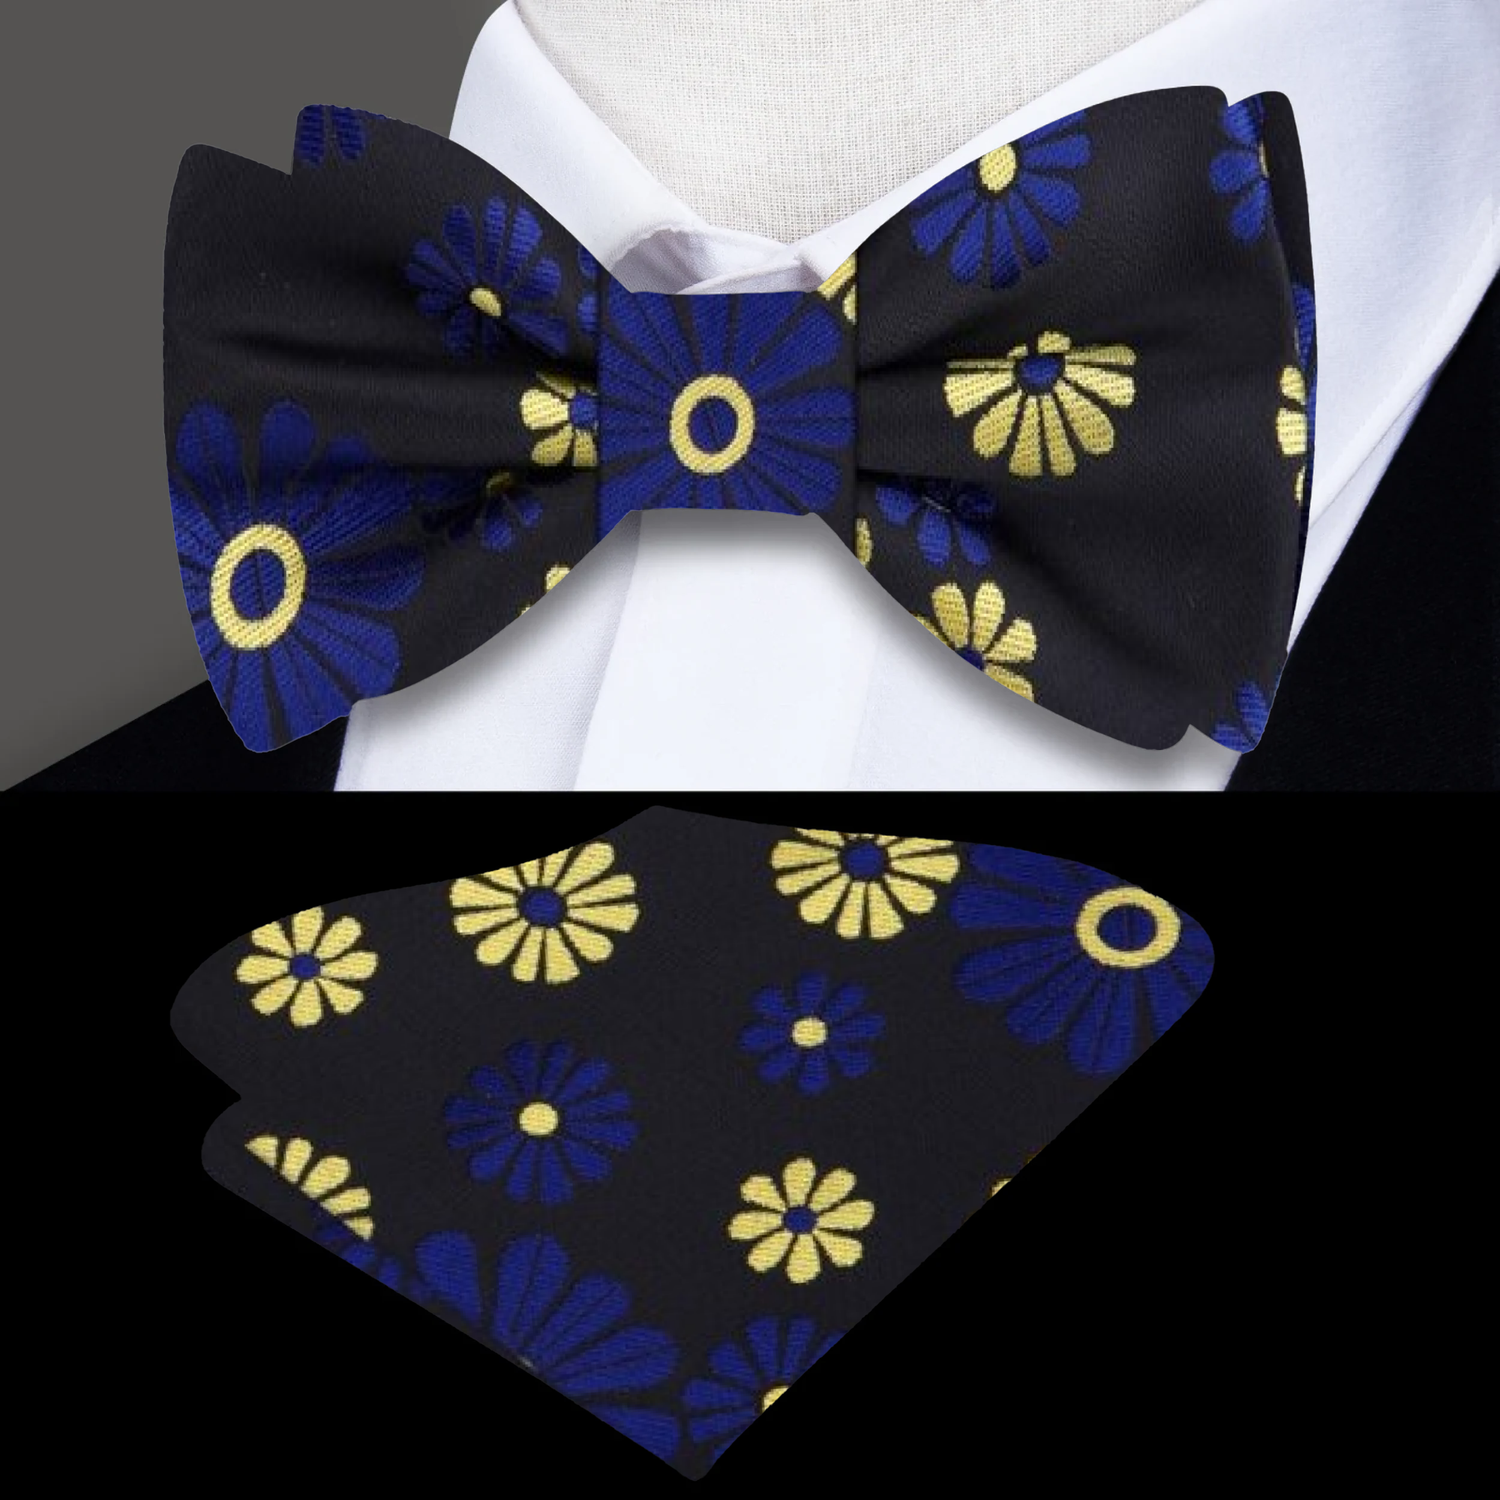 Cactus Flower Bow Tie and Pocket Square||Blue, Gold